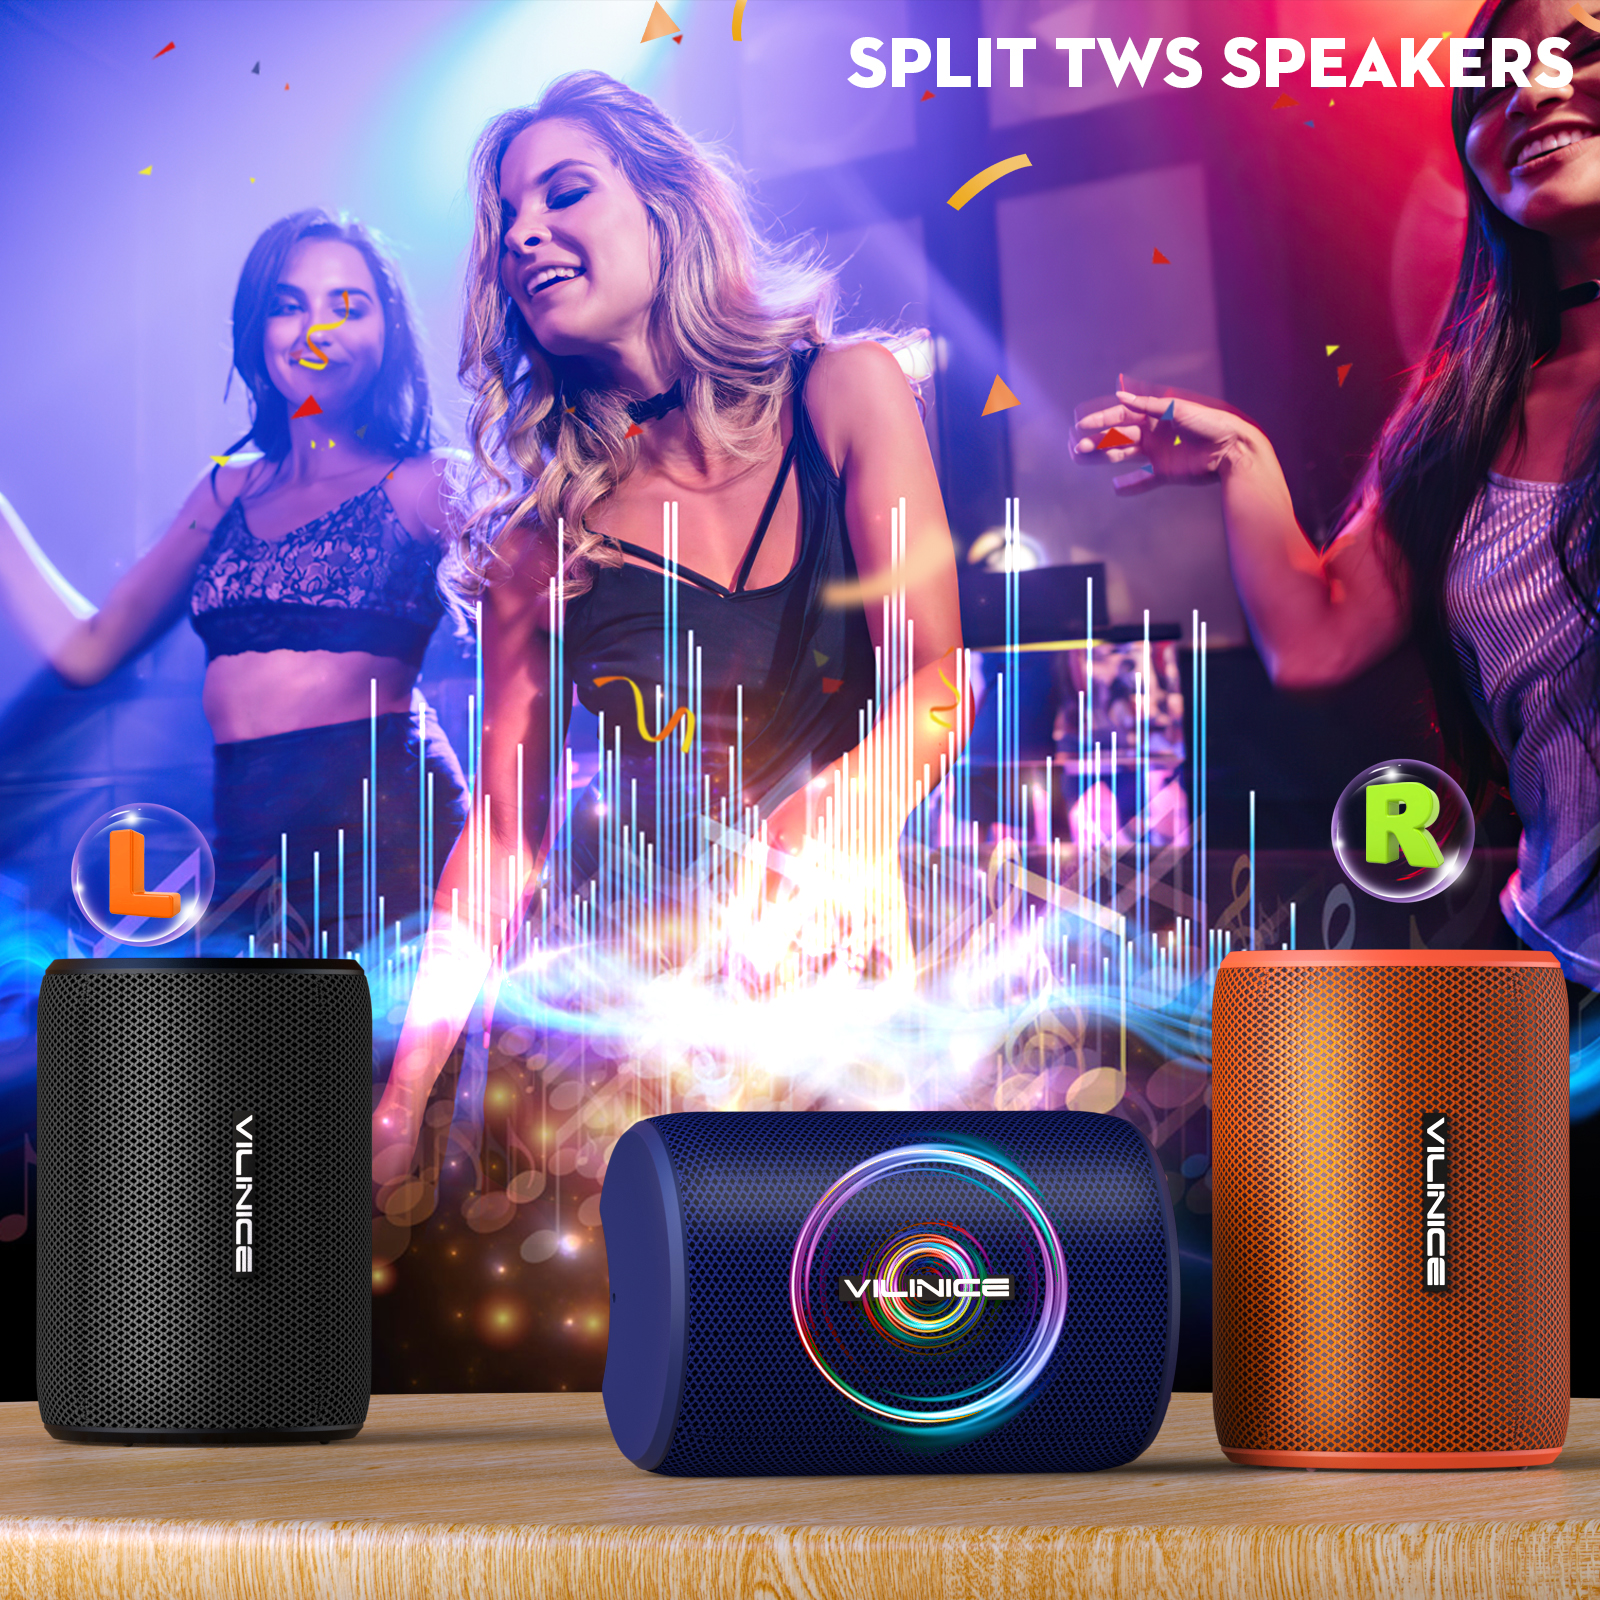 VILINICE Bluetooth Speakers Portable Wireless, IPX7 Waterproof Outdoor Speaker with Subwoofer, TWS Dual Pairing Speakers Small Bluetooth Speaker for Gift, Shower, Party, Home, Travel - image 4 of 8